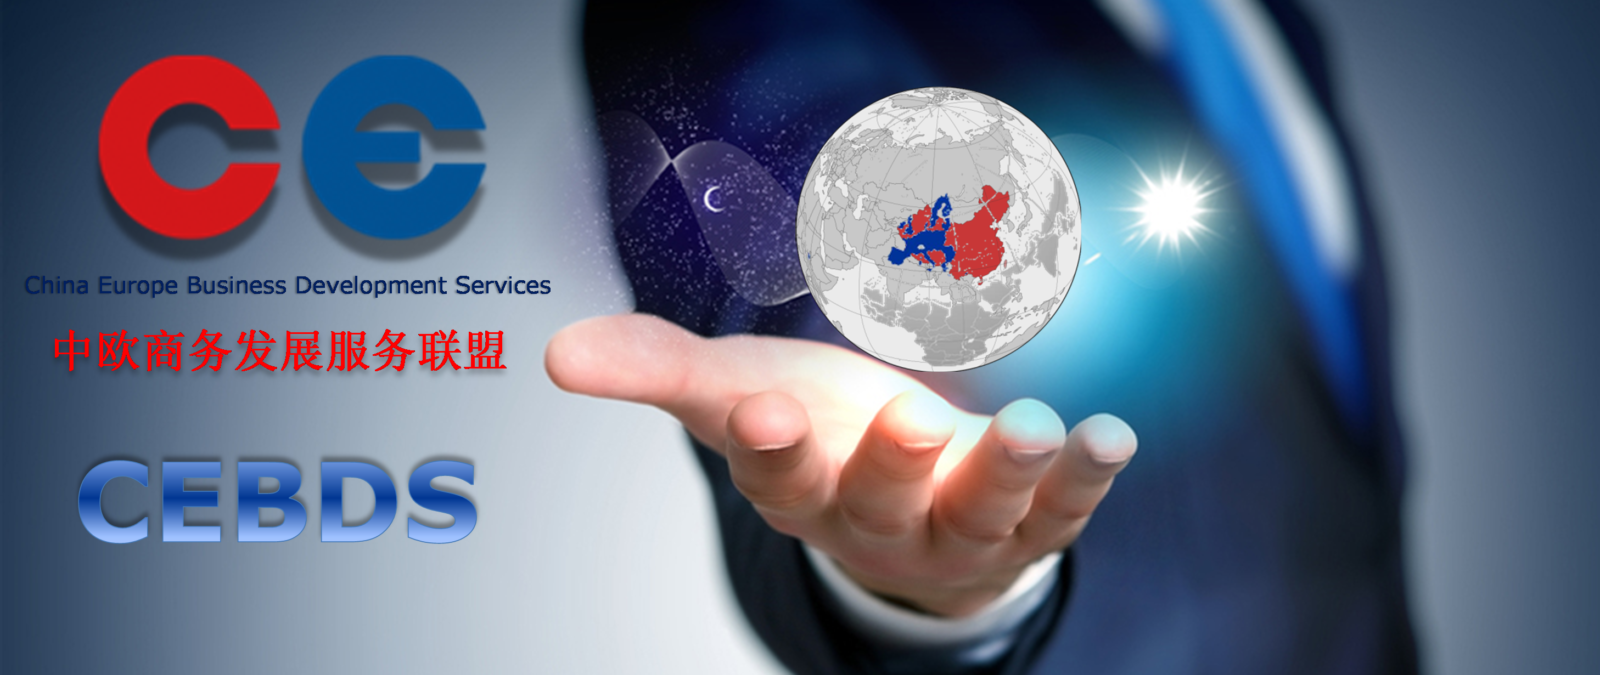 China Europe Business Development Services